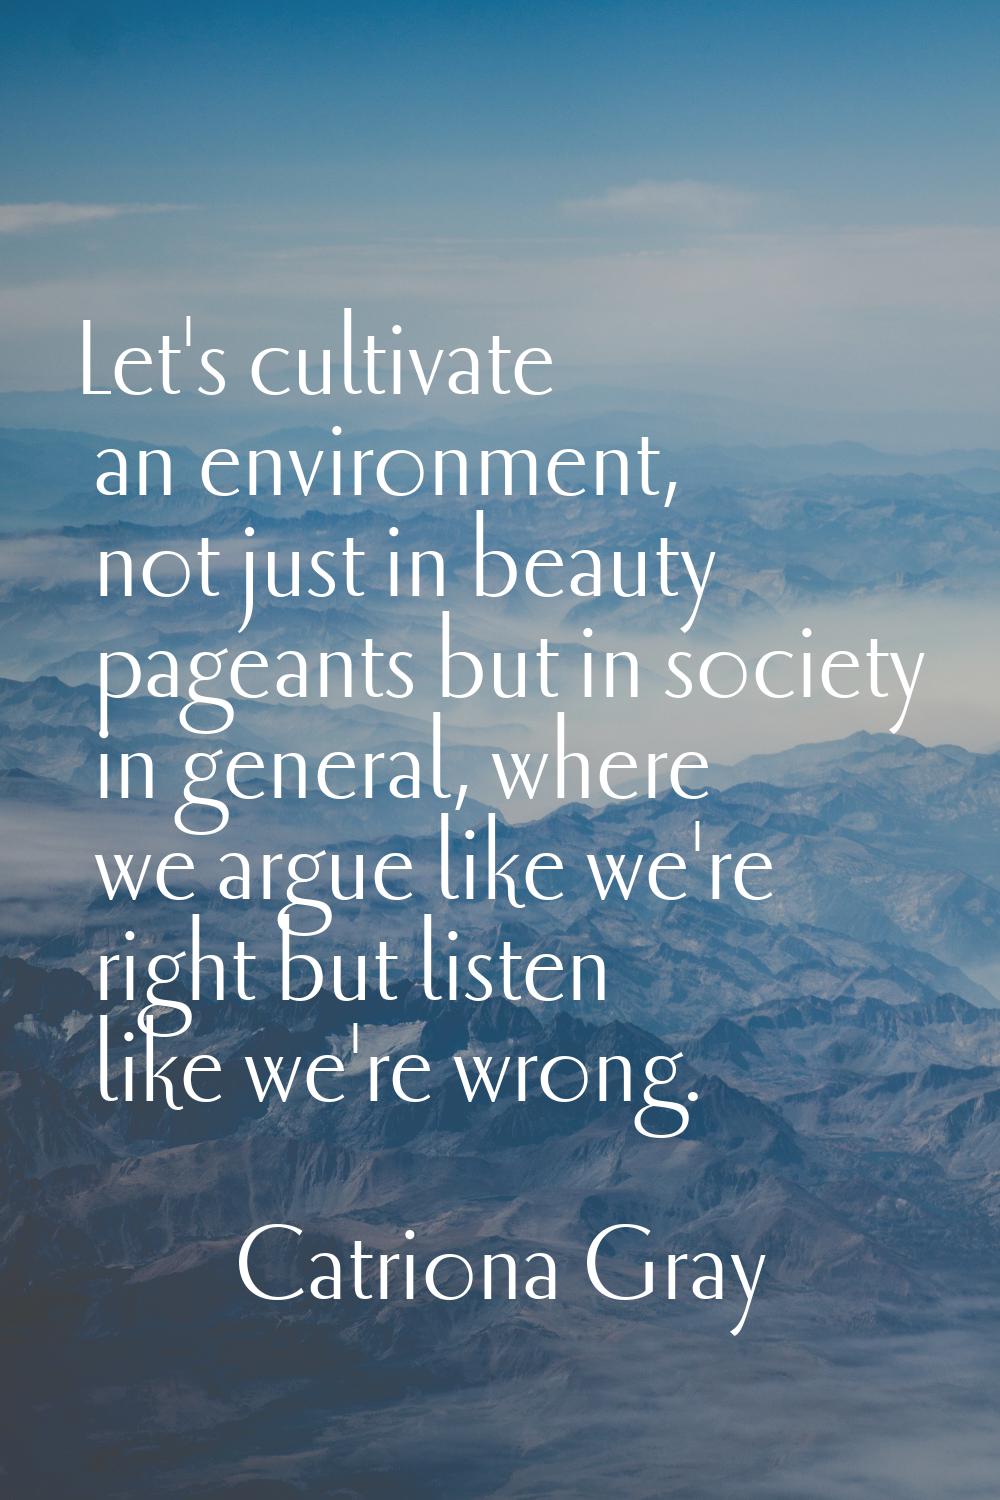 Let's cultivate an environment, not just in beauty pageants but in society in general, where we arg